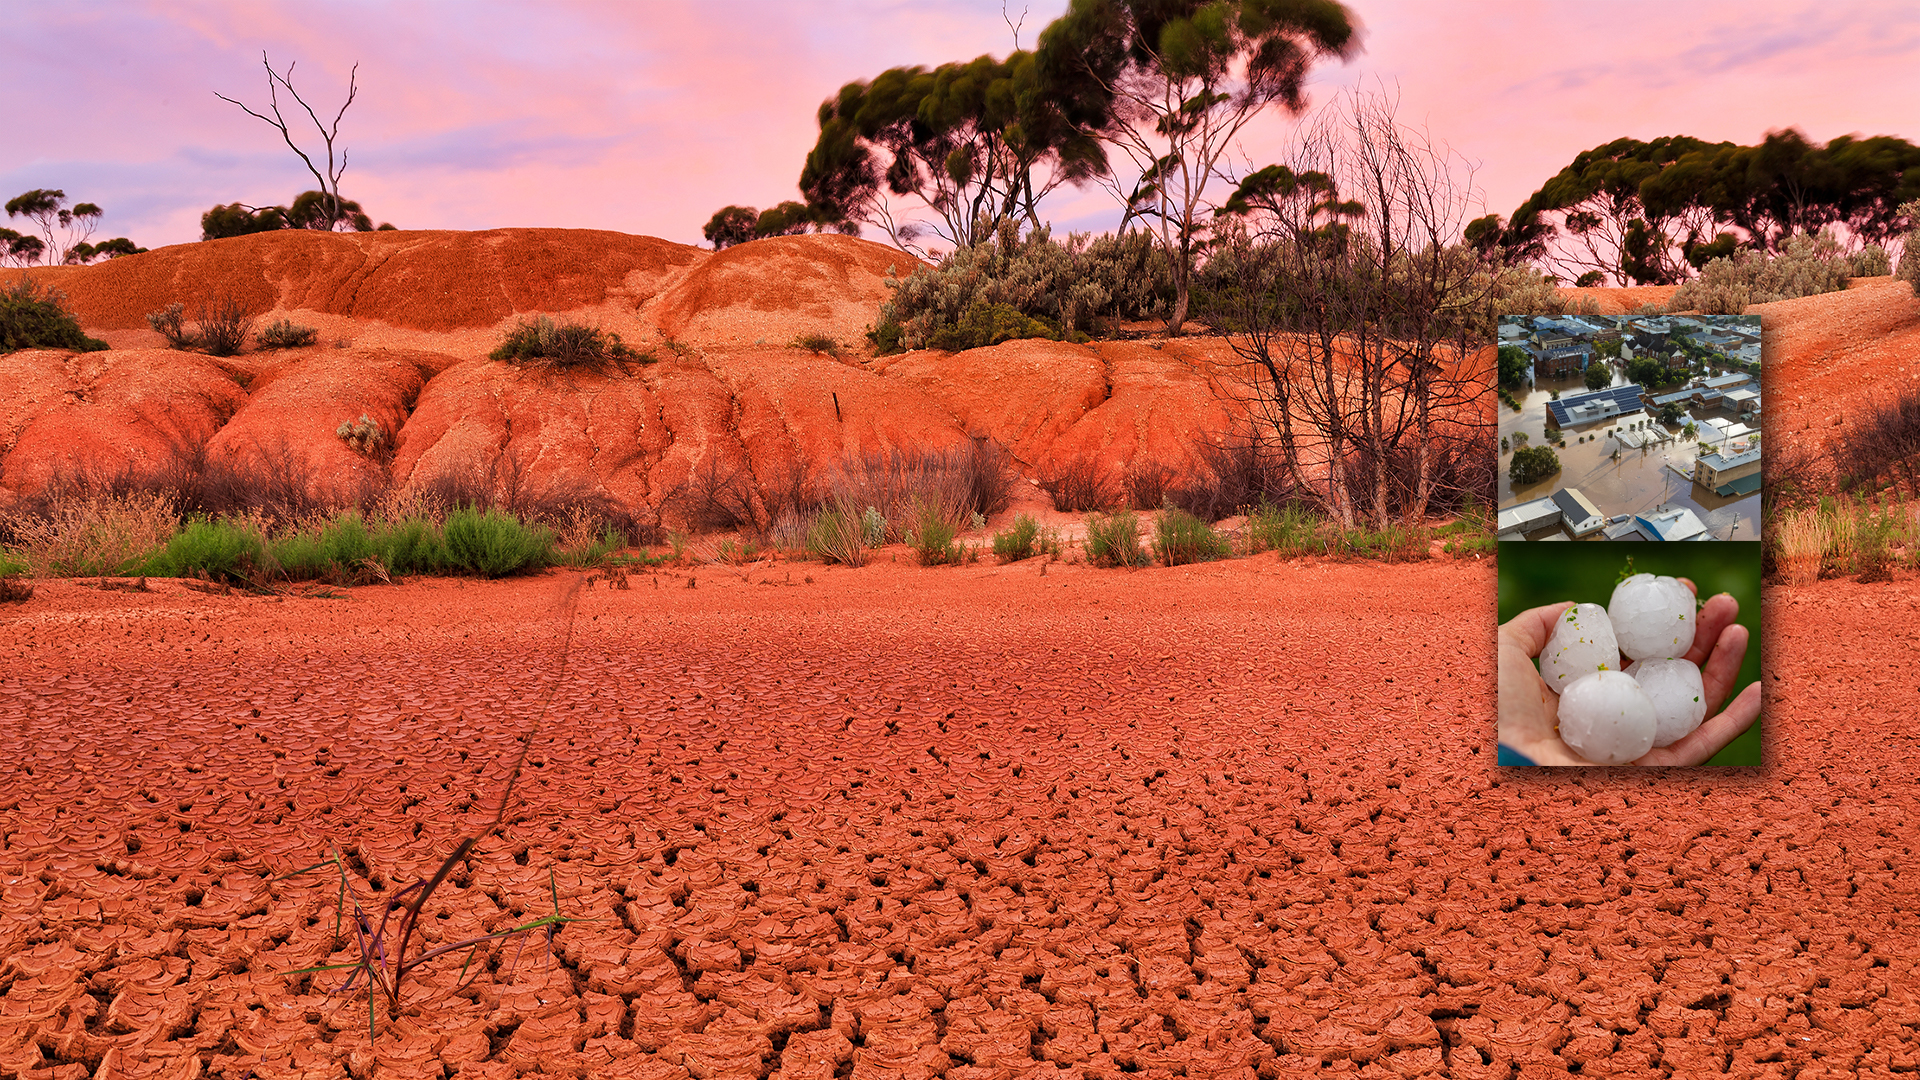 Examples of extreme natural hazards in Australia such as hail, heat stress and flooding.